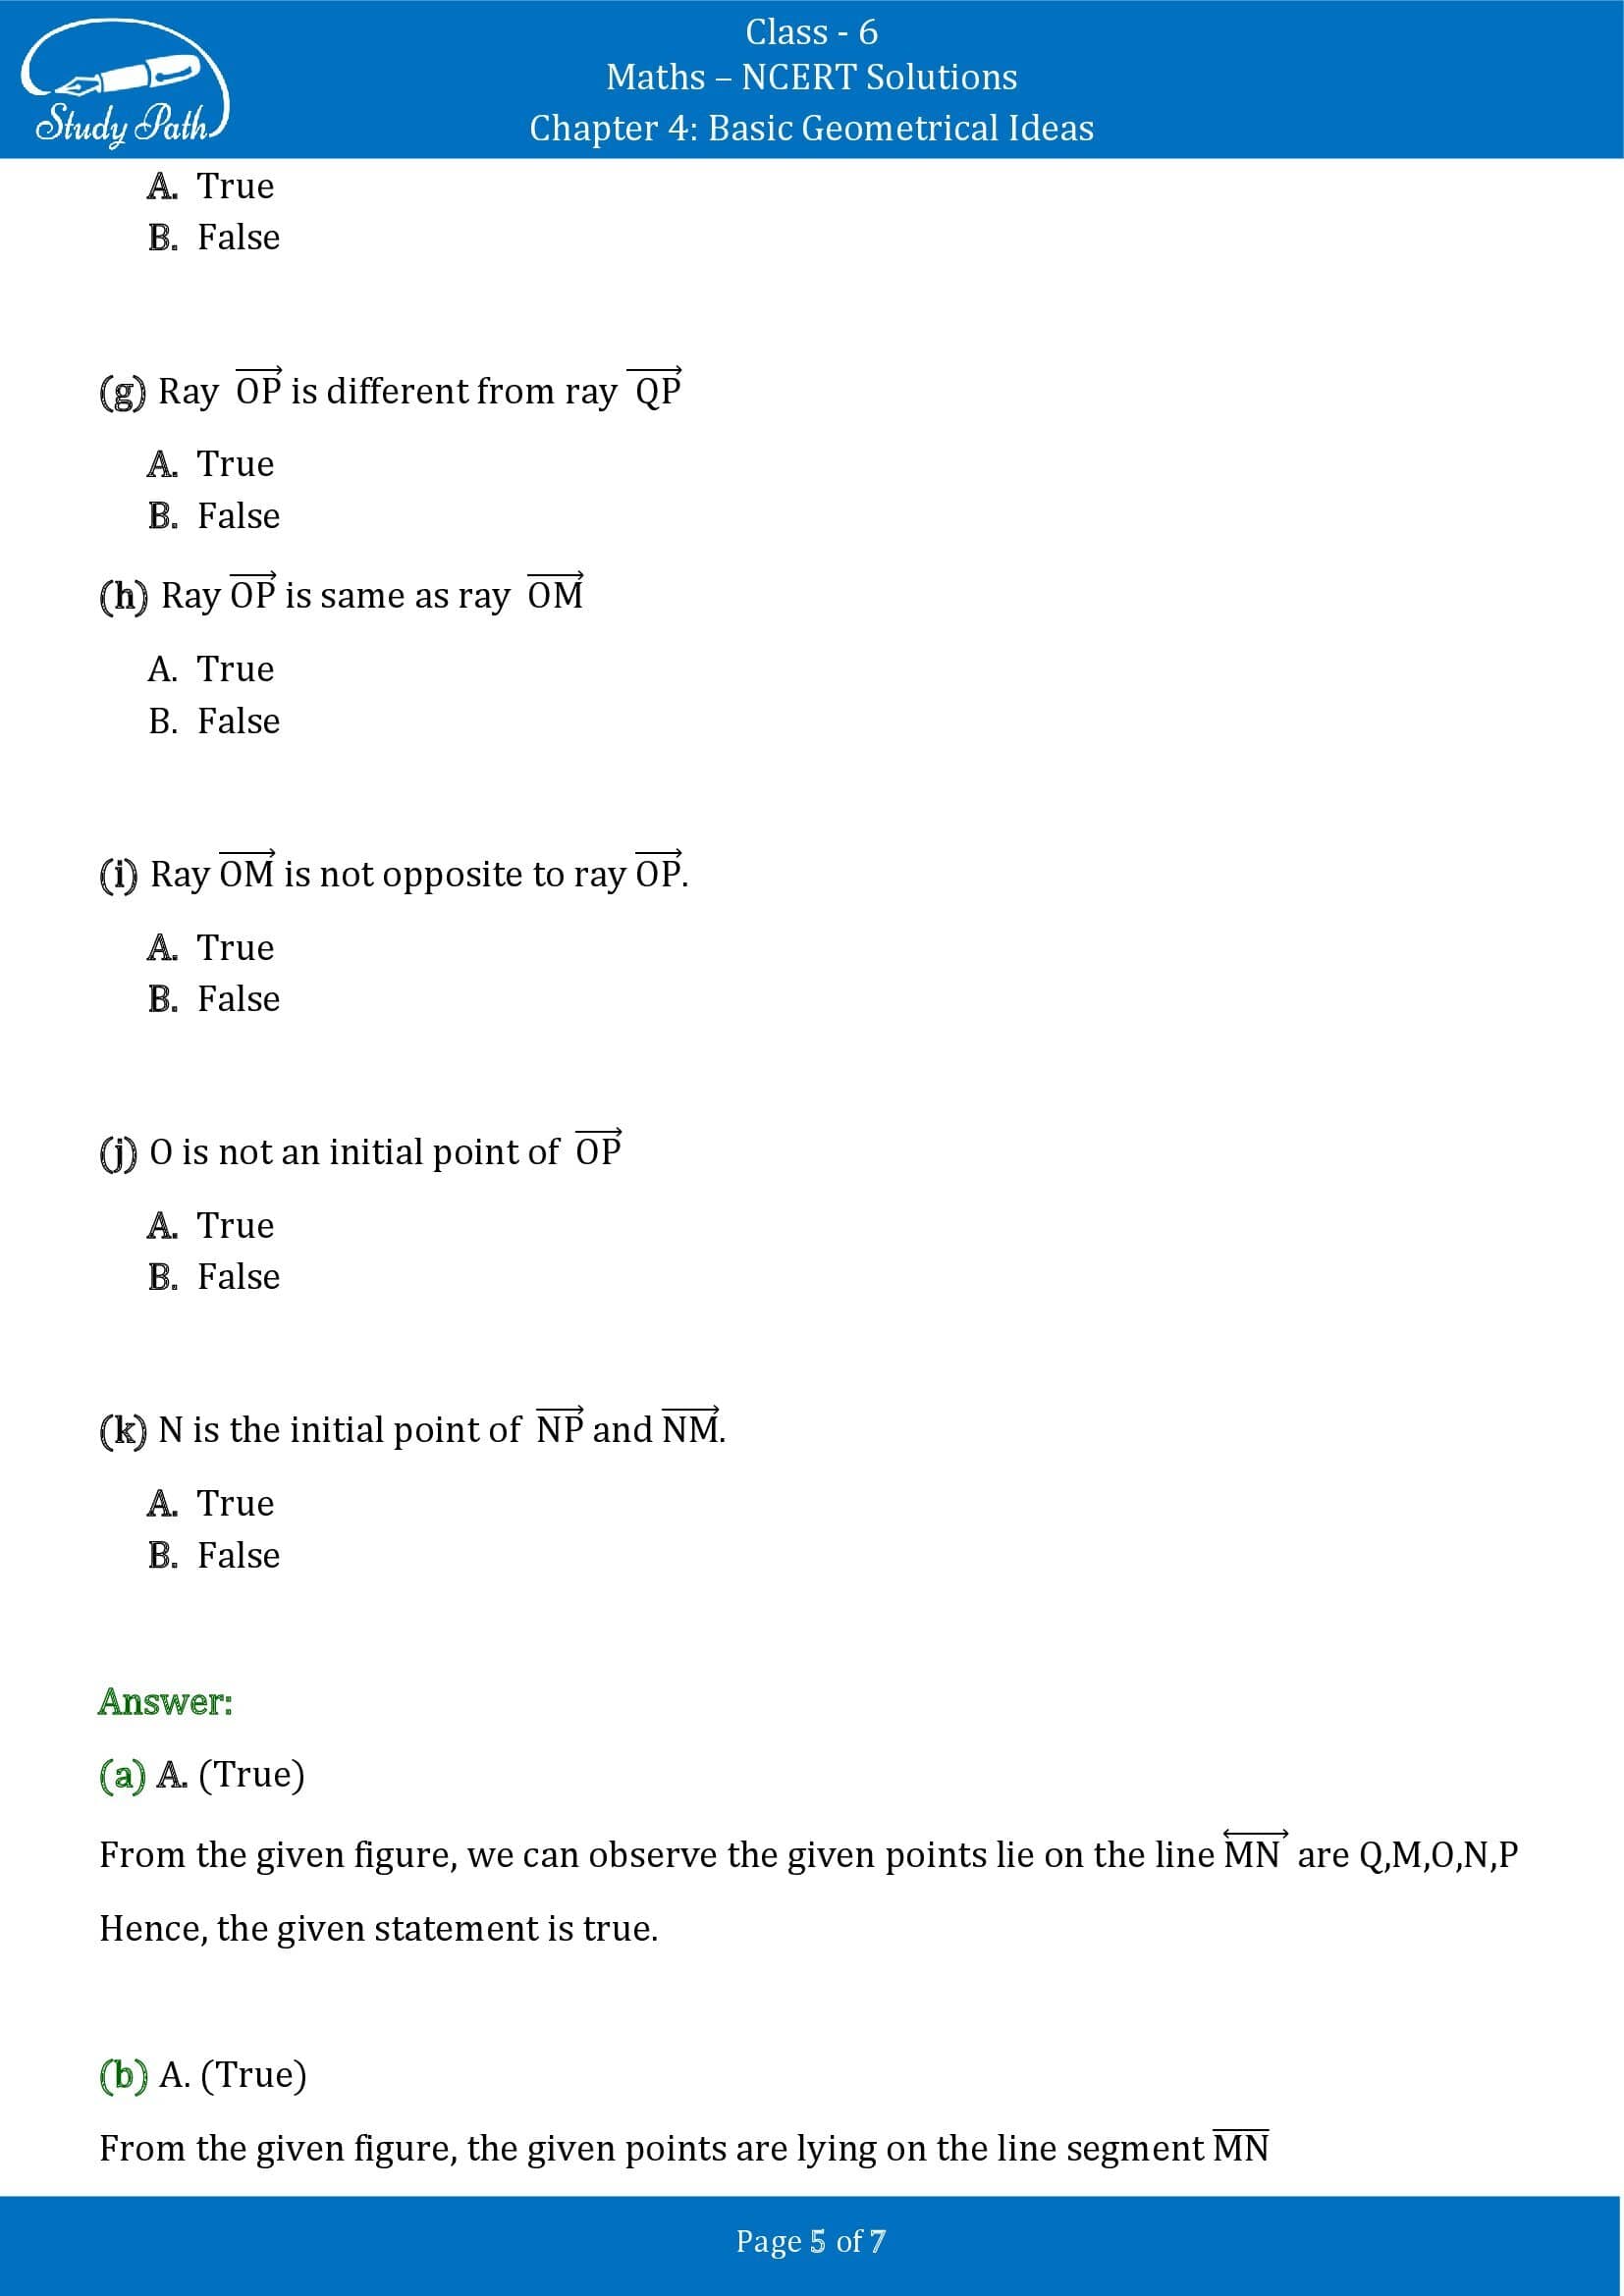 NCERT Solutions for Class 6 Maths Chapter 4 Basic Geometrical Ideas Exercise 4.1 00005